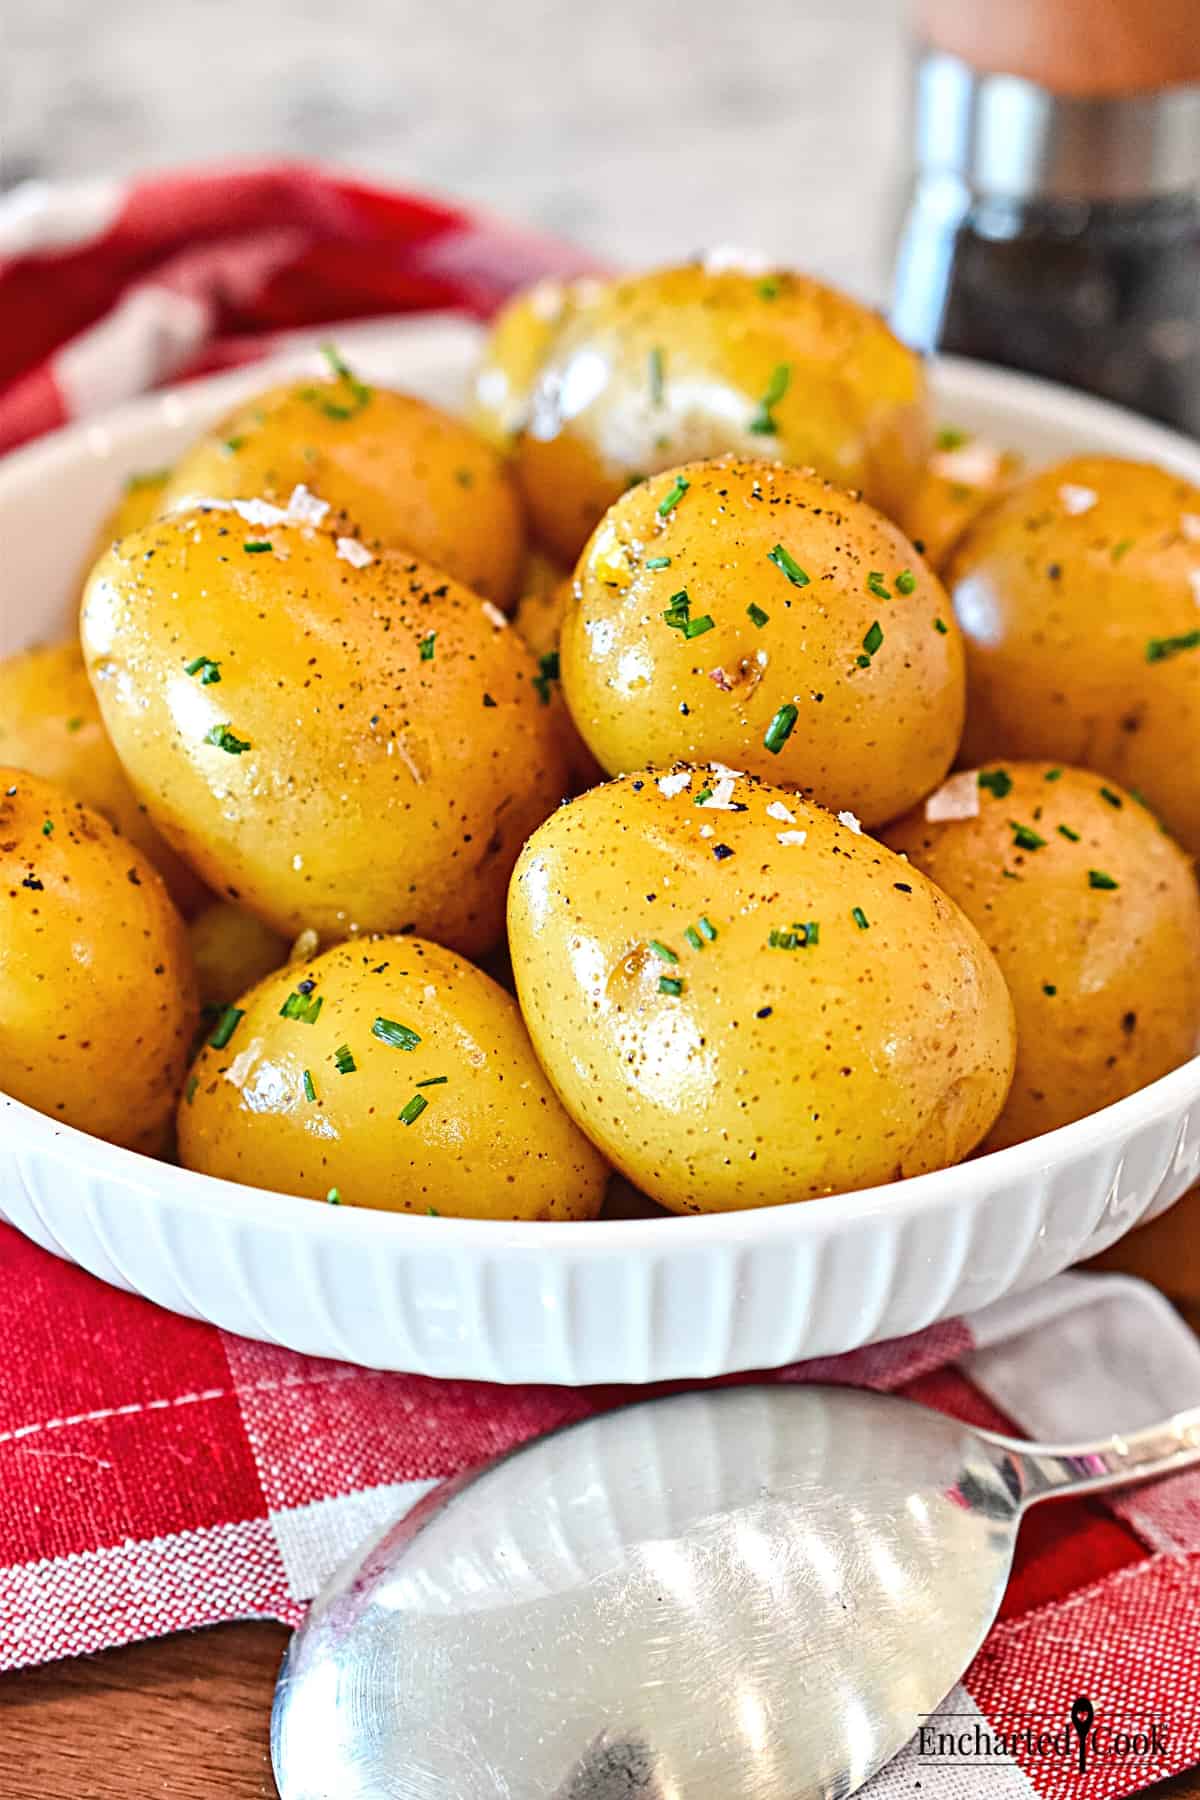 Boiled small whole golden potatoes in a white dish with a pepper mill and serving spoon.